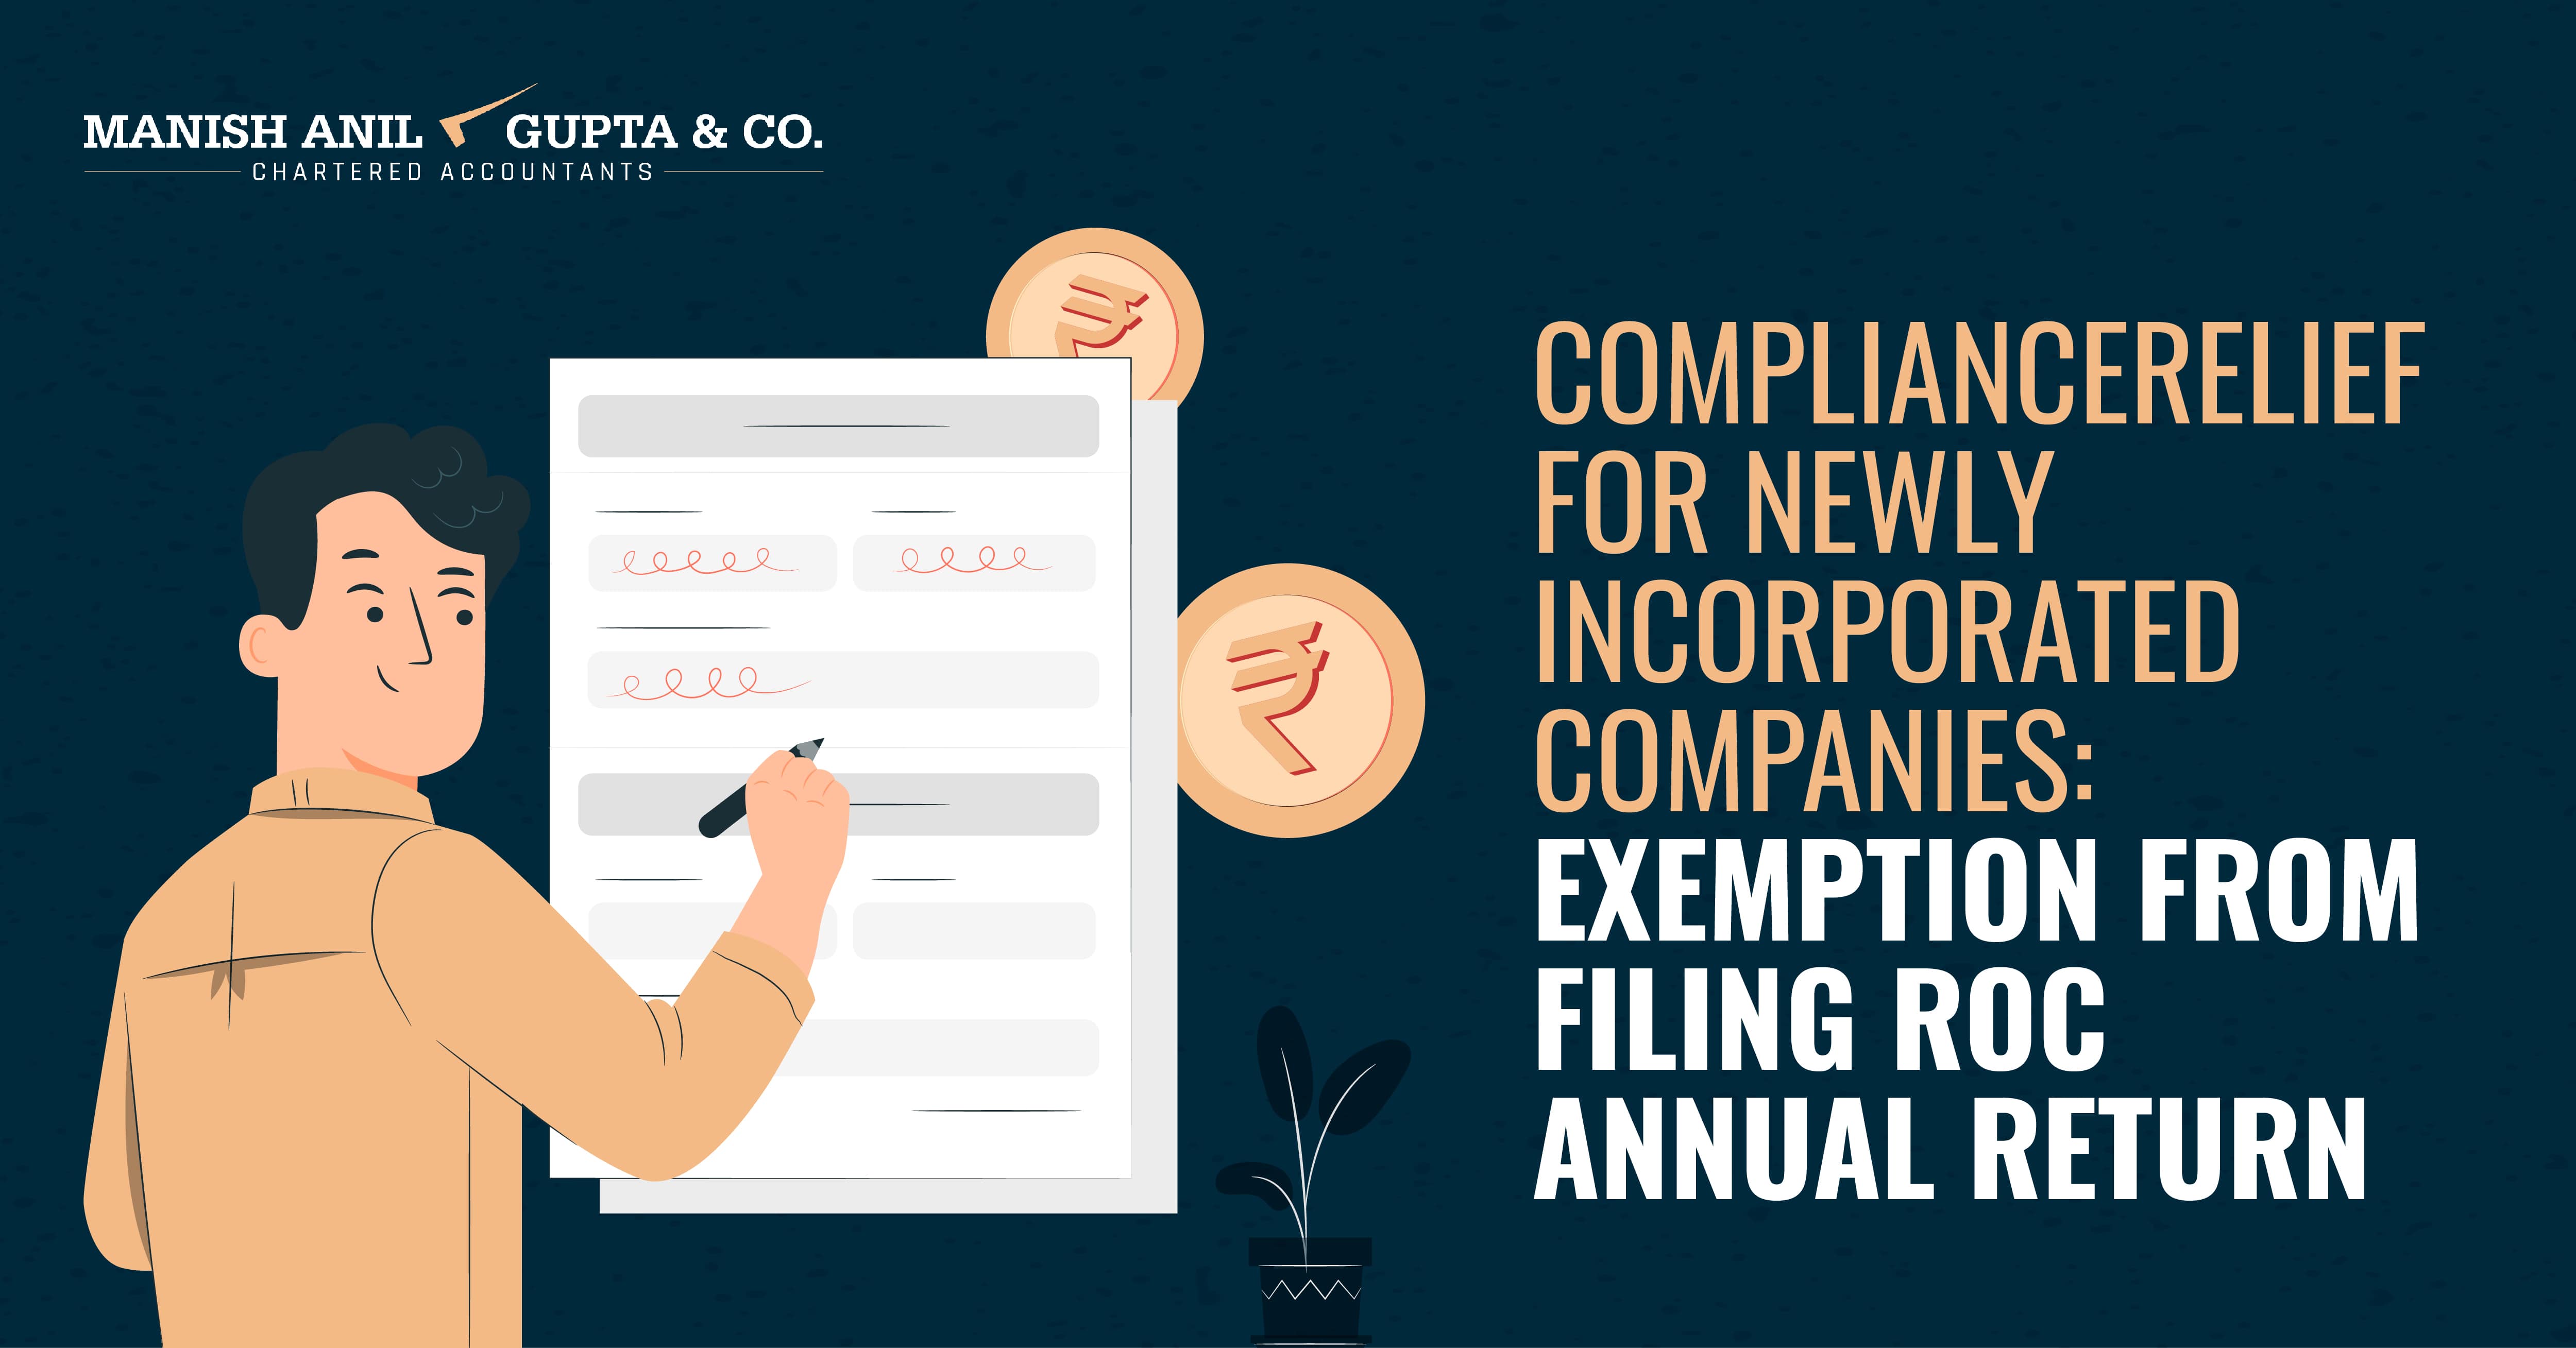 Compliance Relief for Newly Incorporated Companies: Exemption from Filing ROC Annual Return